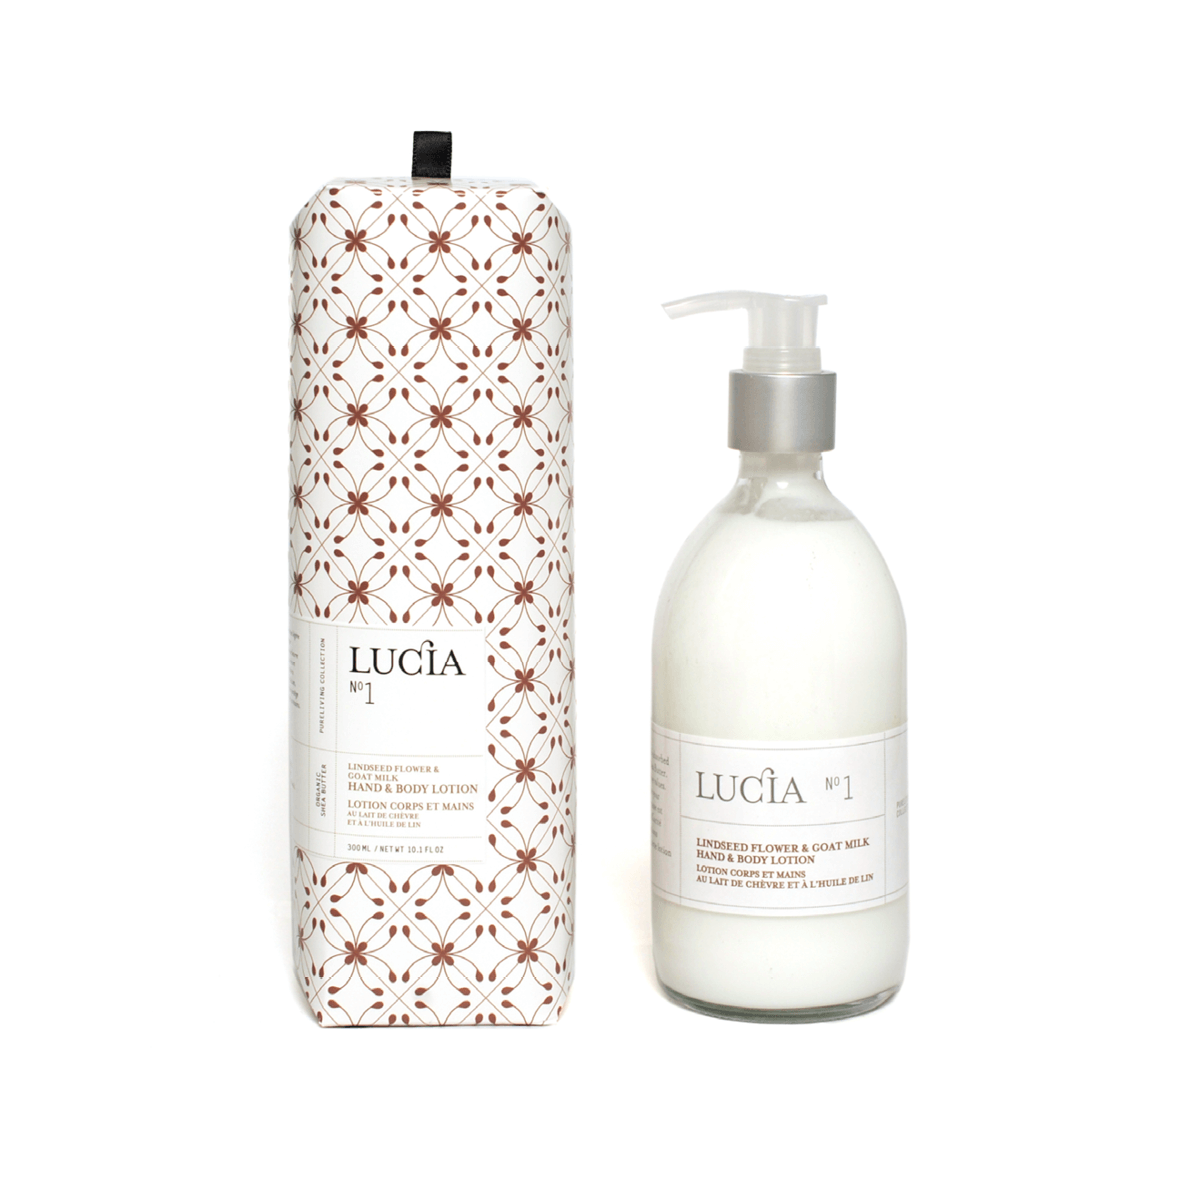 Lucia #1-Linseed & Goat Milk Hand & Body Lotion